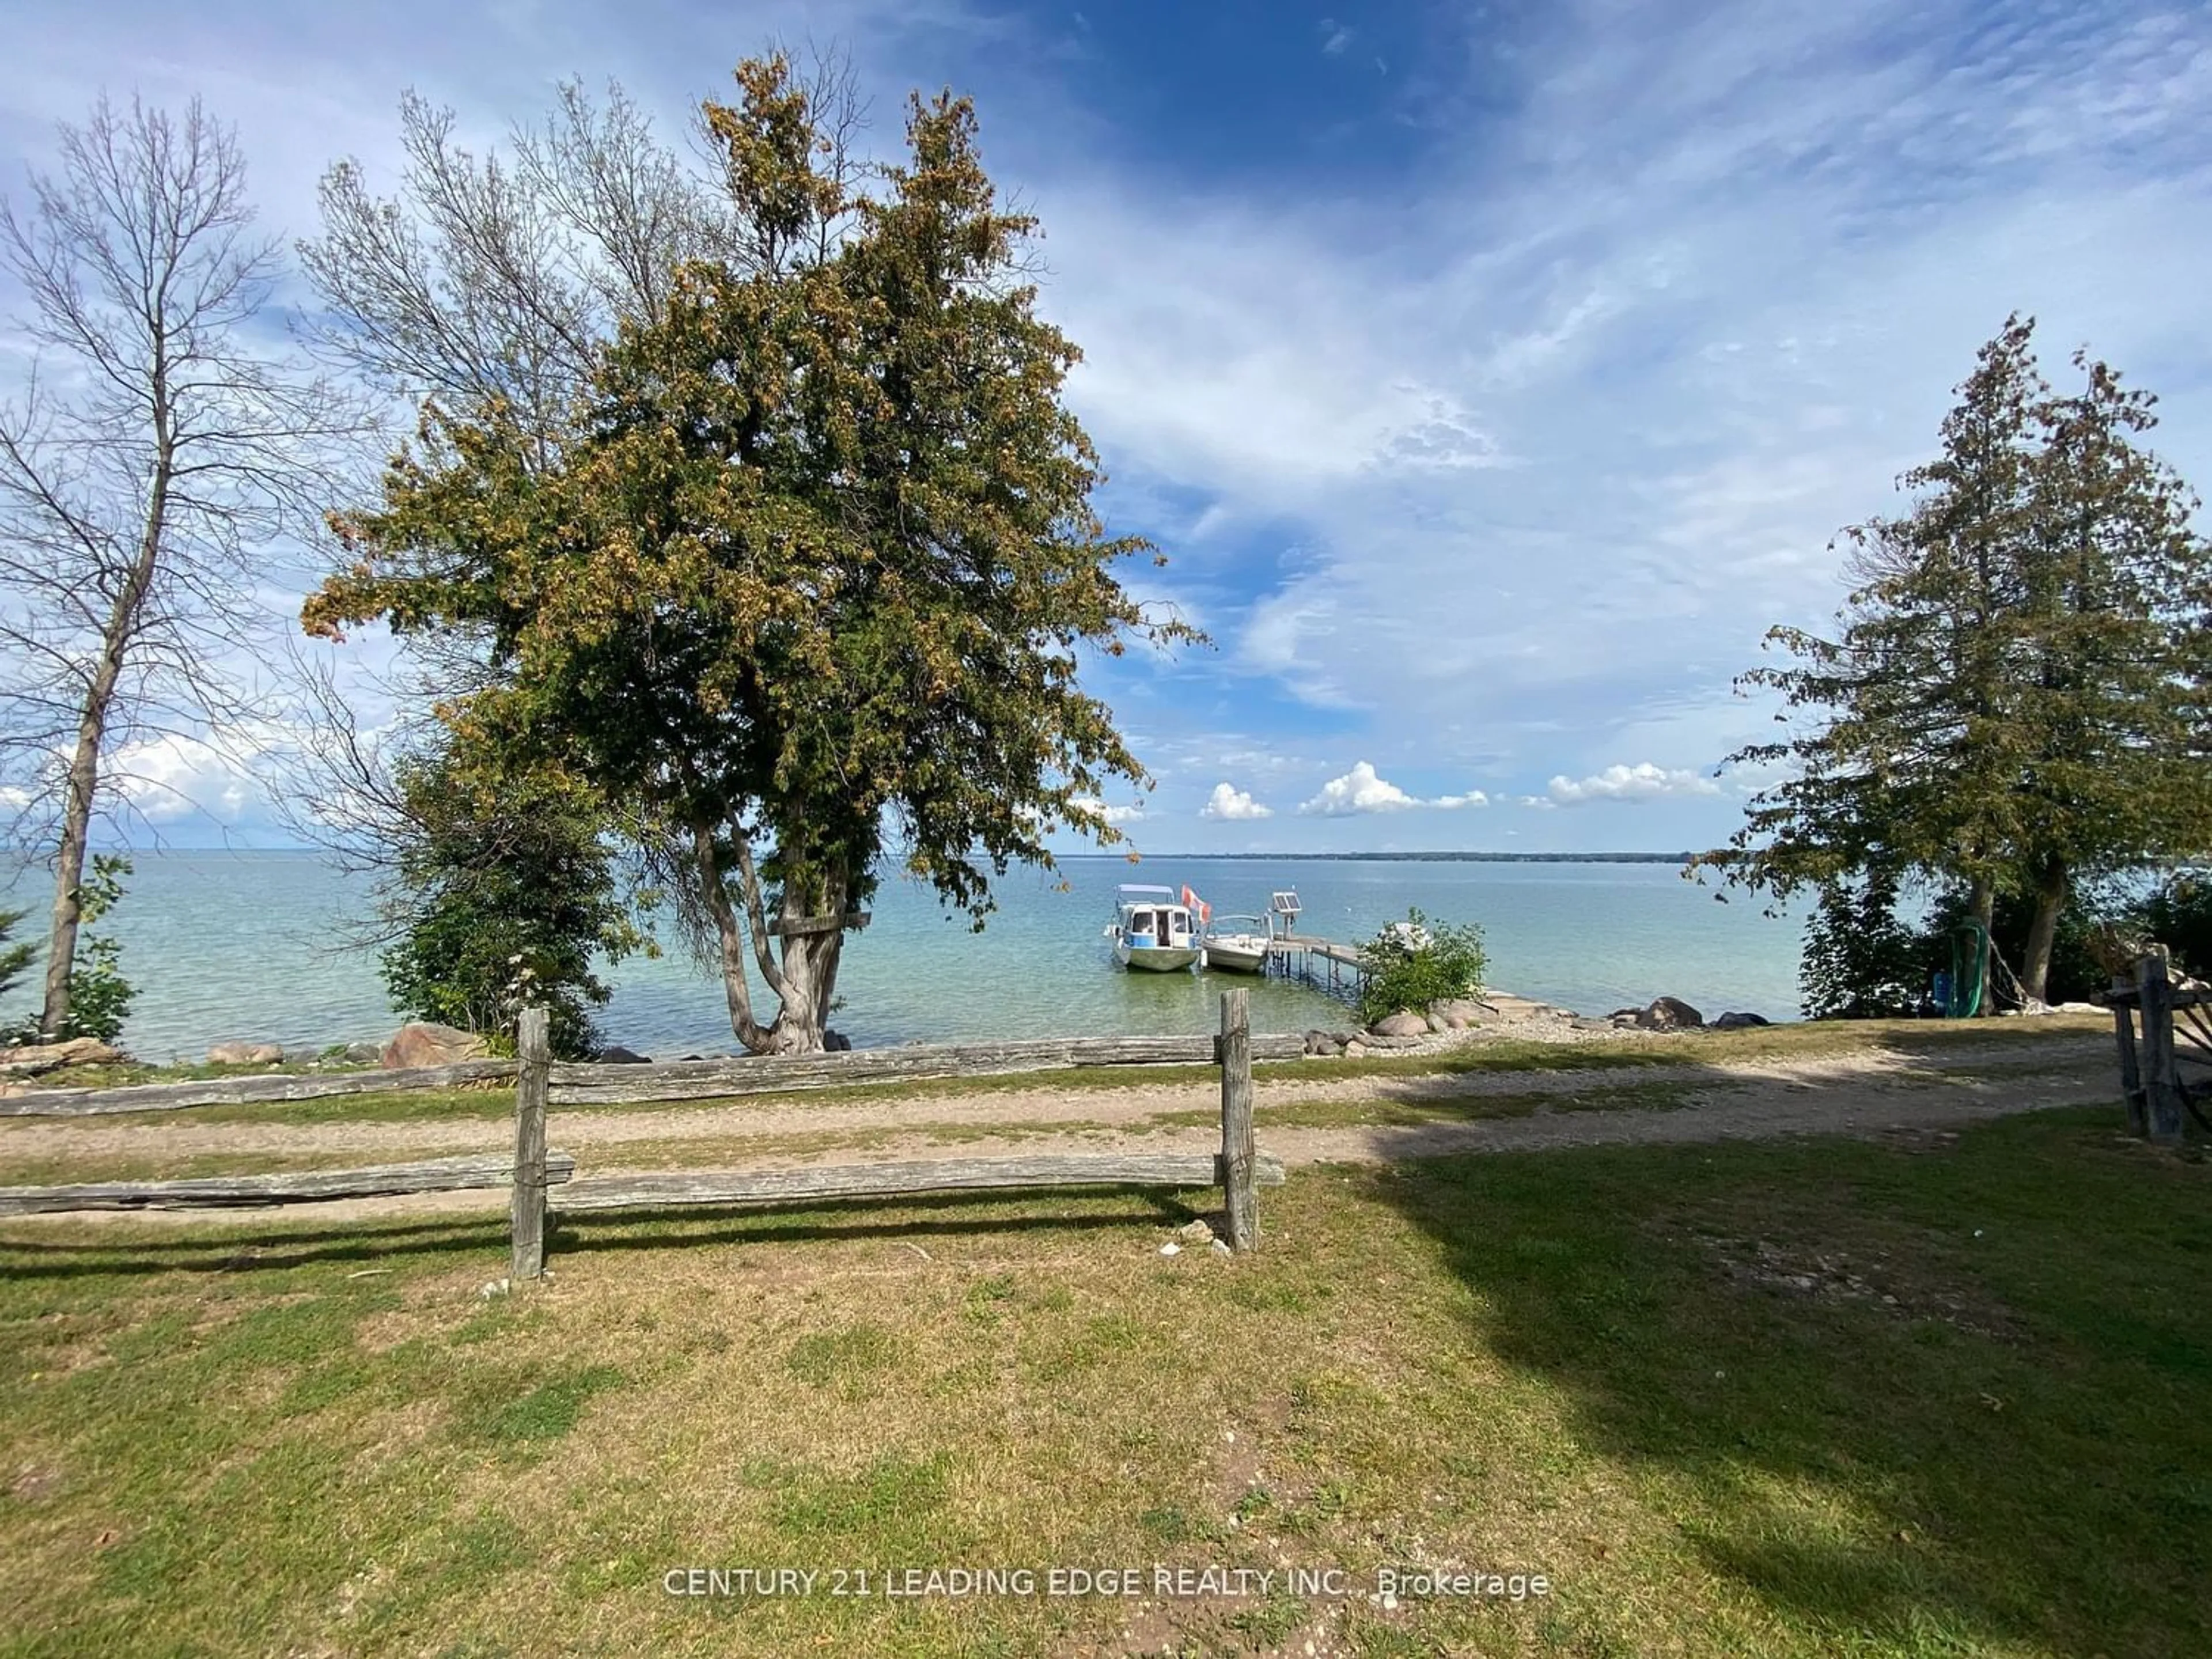 Lakeview for 40586 Shore Rd, Brock Ontario L0K 1A0